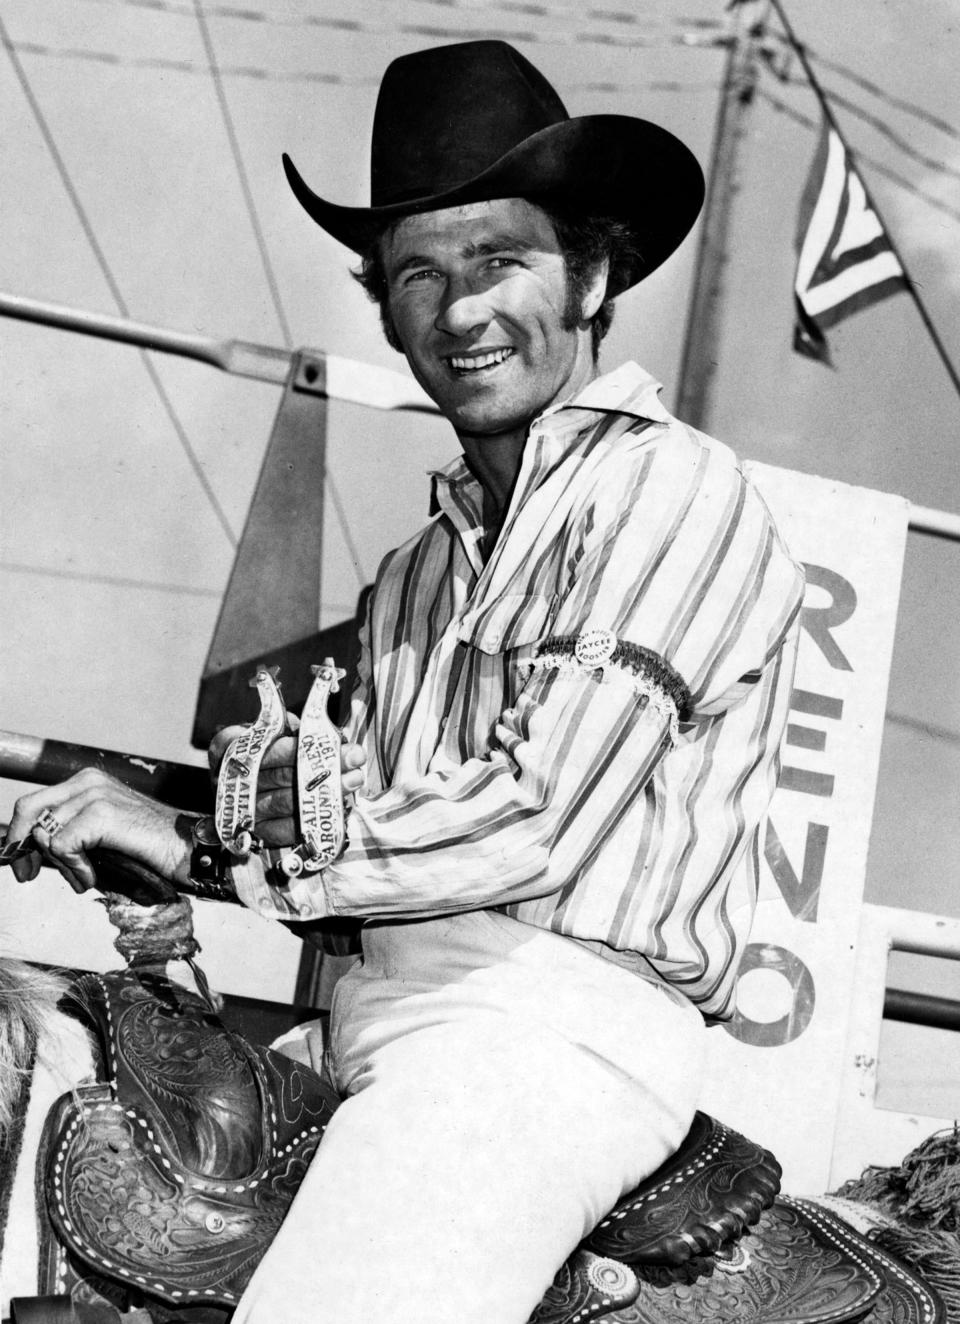 Larry Mahan, a native of Brooks, is considered one of the greatest rodeo cowboys of all time. He died May 7 at age 79.